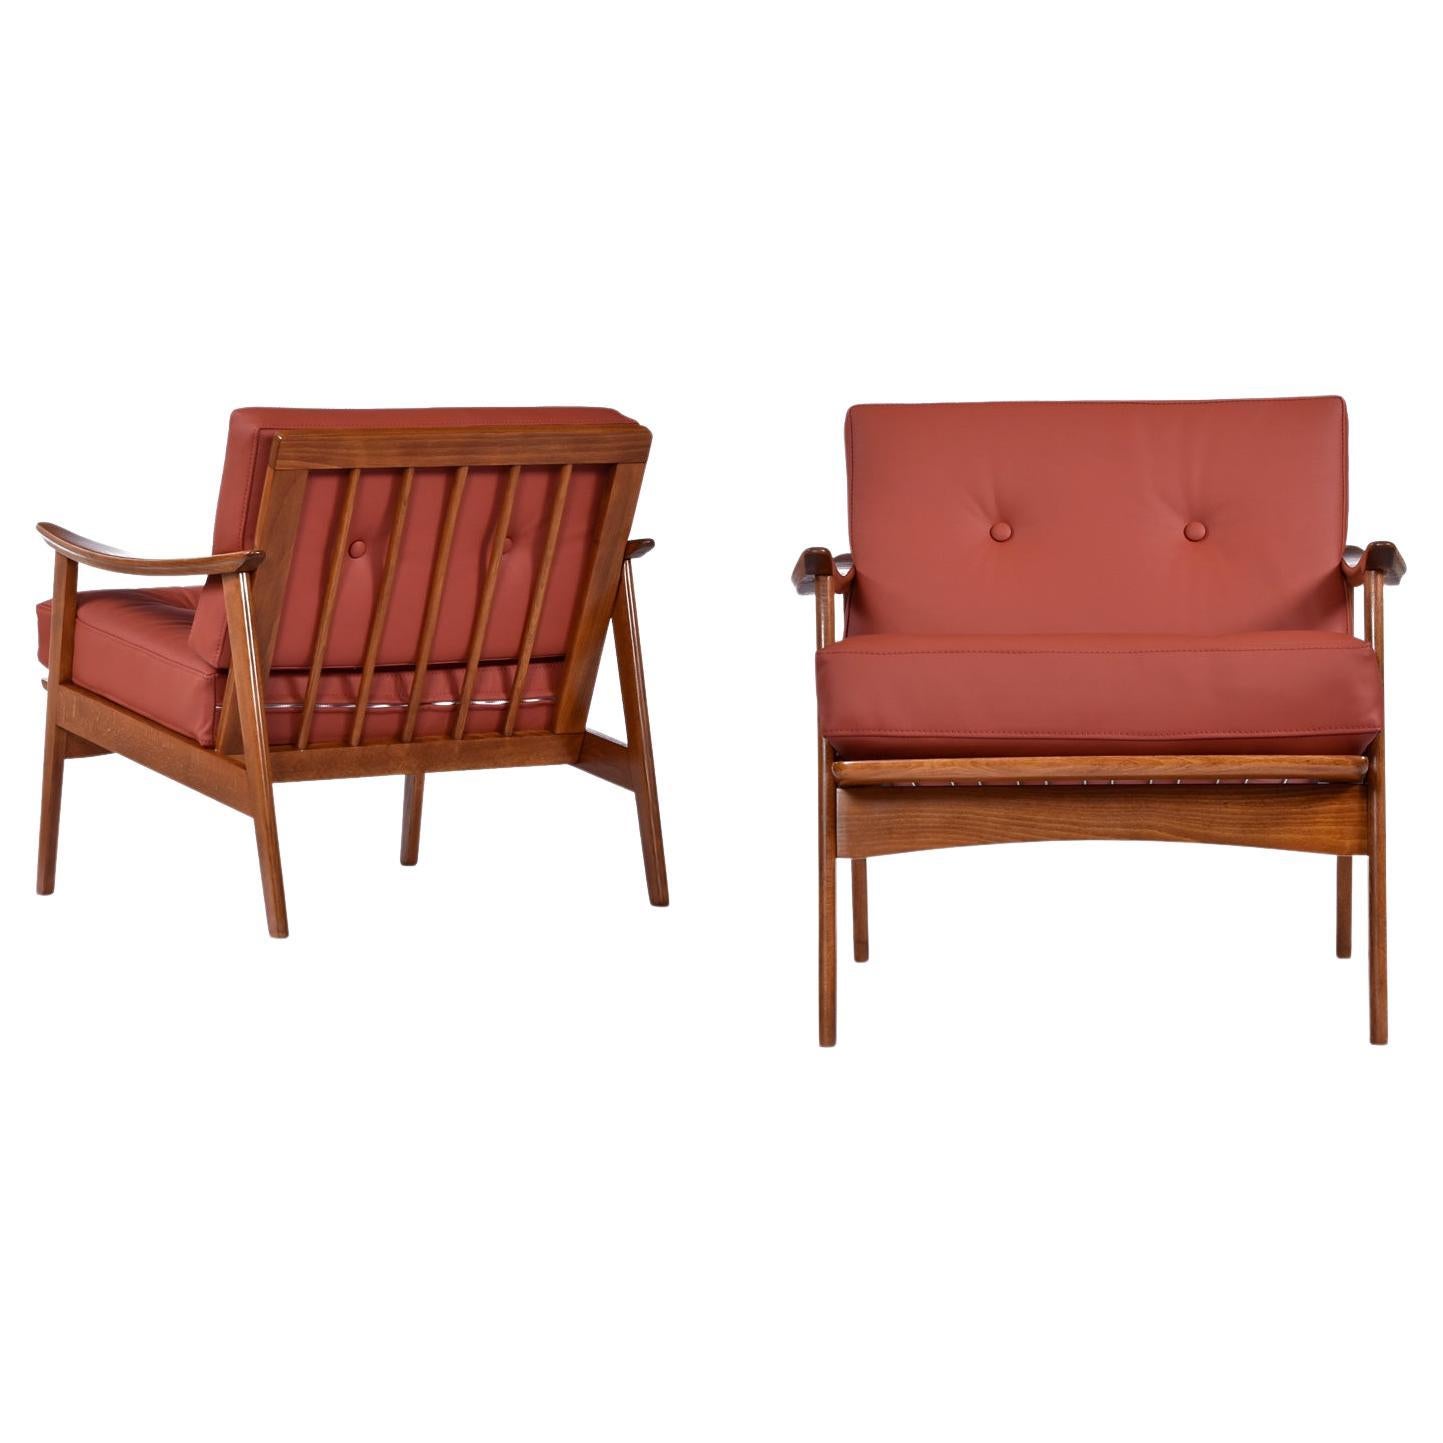 Handsome pair of solid beech wood Mid-Century Modern armchairs made in Scandinavia. These classic, timeless armchairs have been refinished and updated with all new top grain burgundy-cognac leather upholstery and handsome button tufting.  Tailored